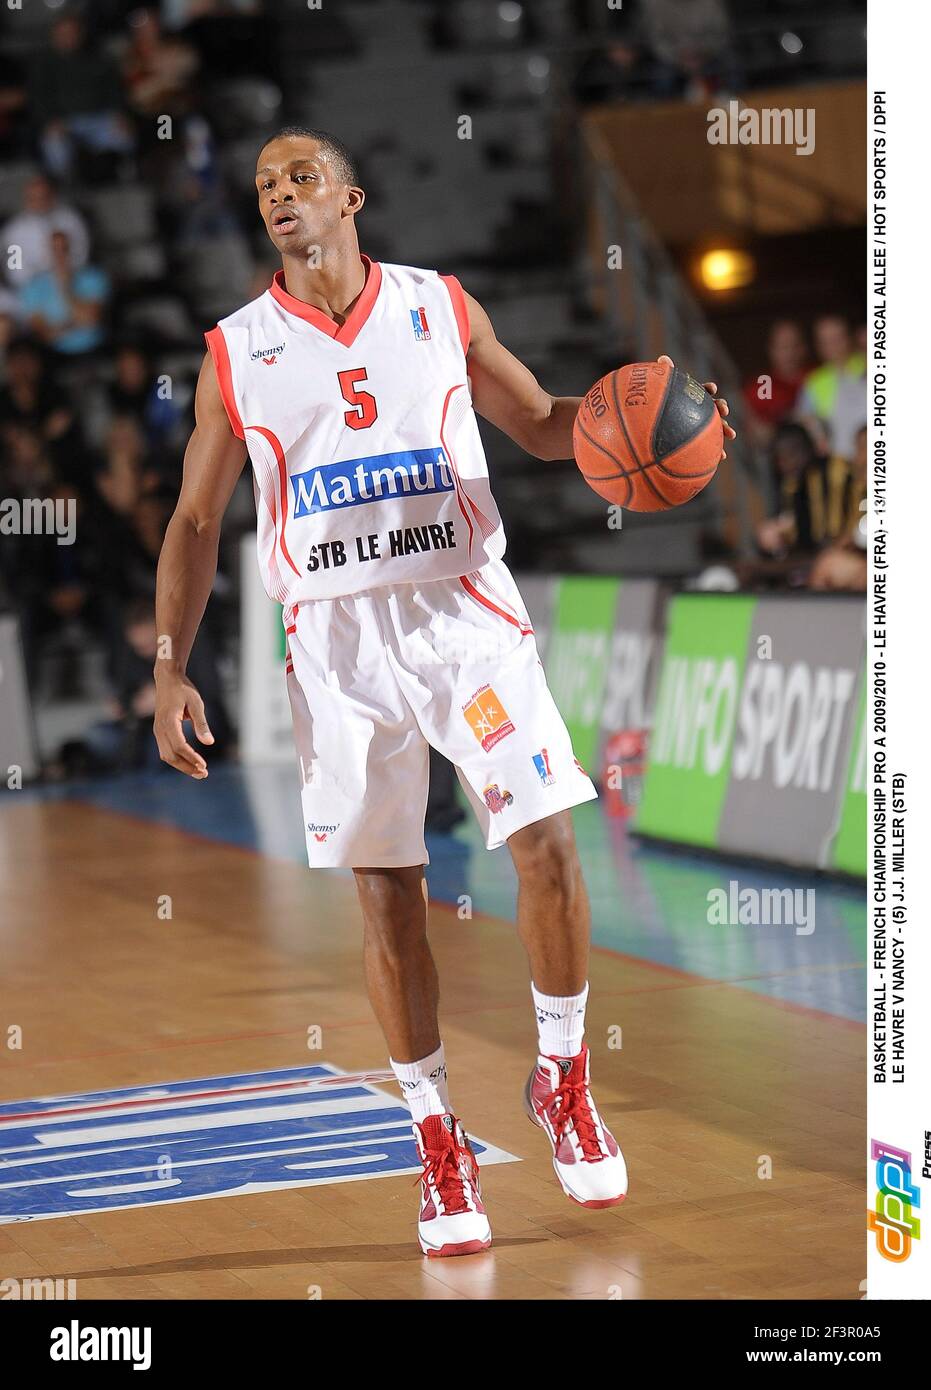 BASKETBALL - FRENCH CHAMPIONSHIP PRO A 2009/2010 - LE HAVRE (FRA) -  13/11/2009 - PHOTO : PASCAL ALLEE / HOT SPORTS / DPPILE HAVRE V NANCY - (5) J.J.  MILLER (STB Stock Photo - Alamy